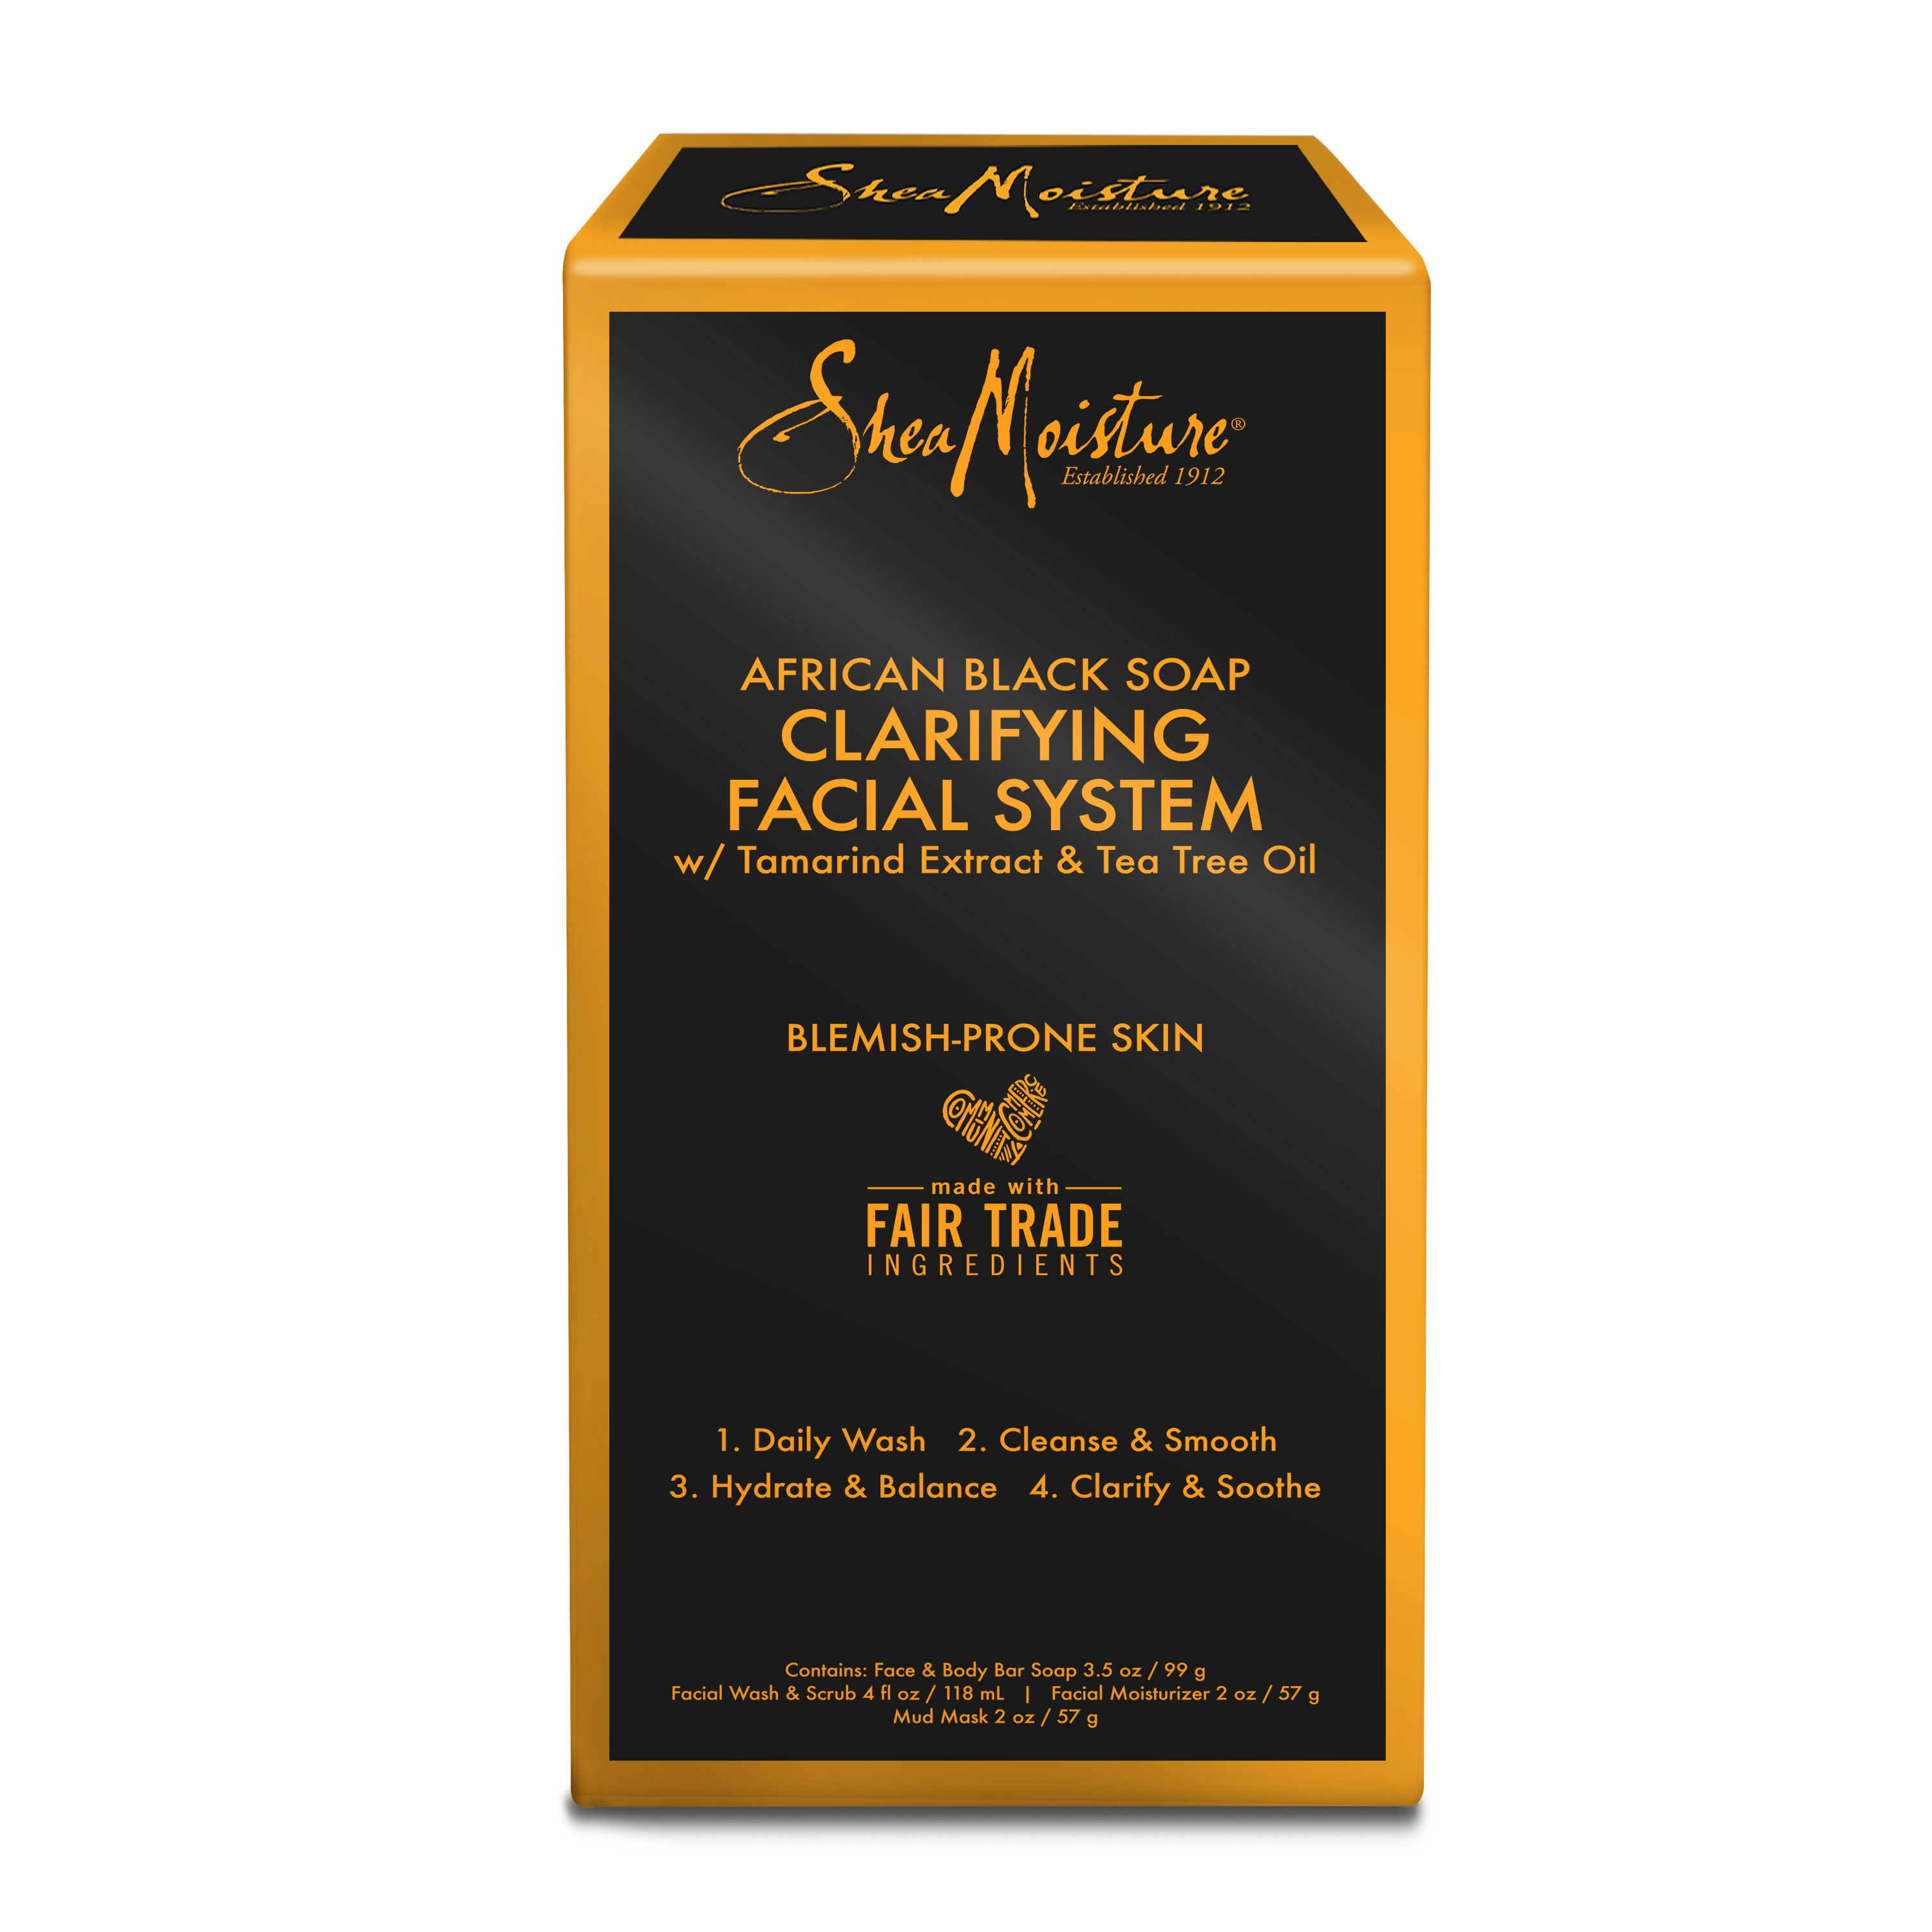 SheaMoisture Clarifying Facial System Kit, African Black Soap, 4 Pieces - image 1 of 11